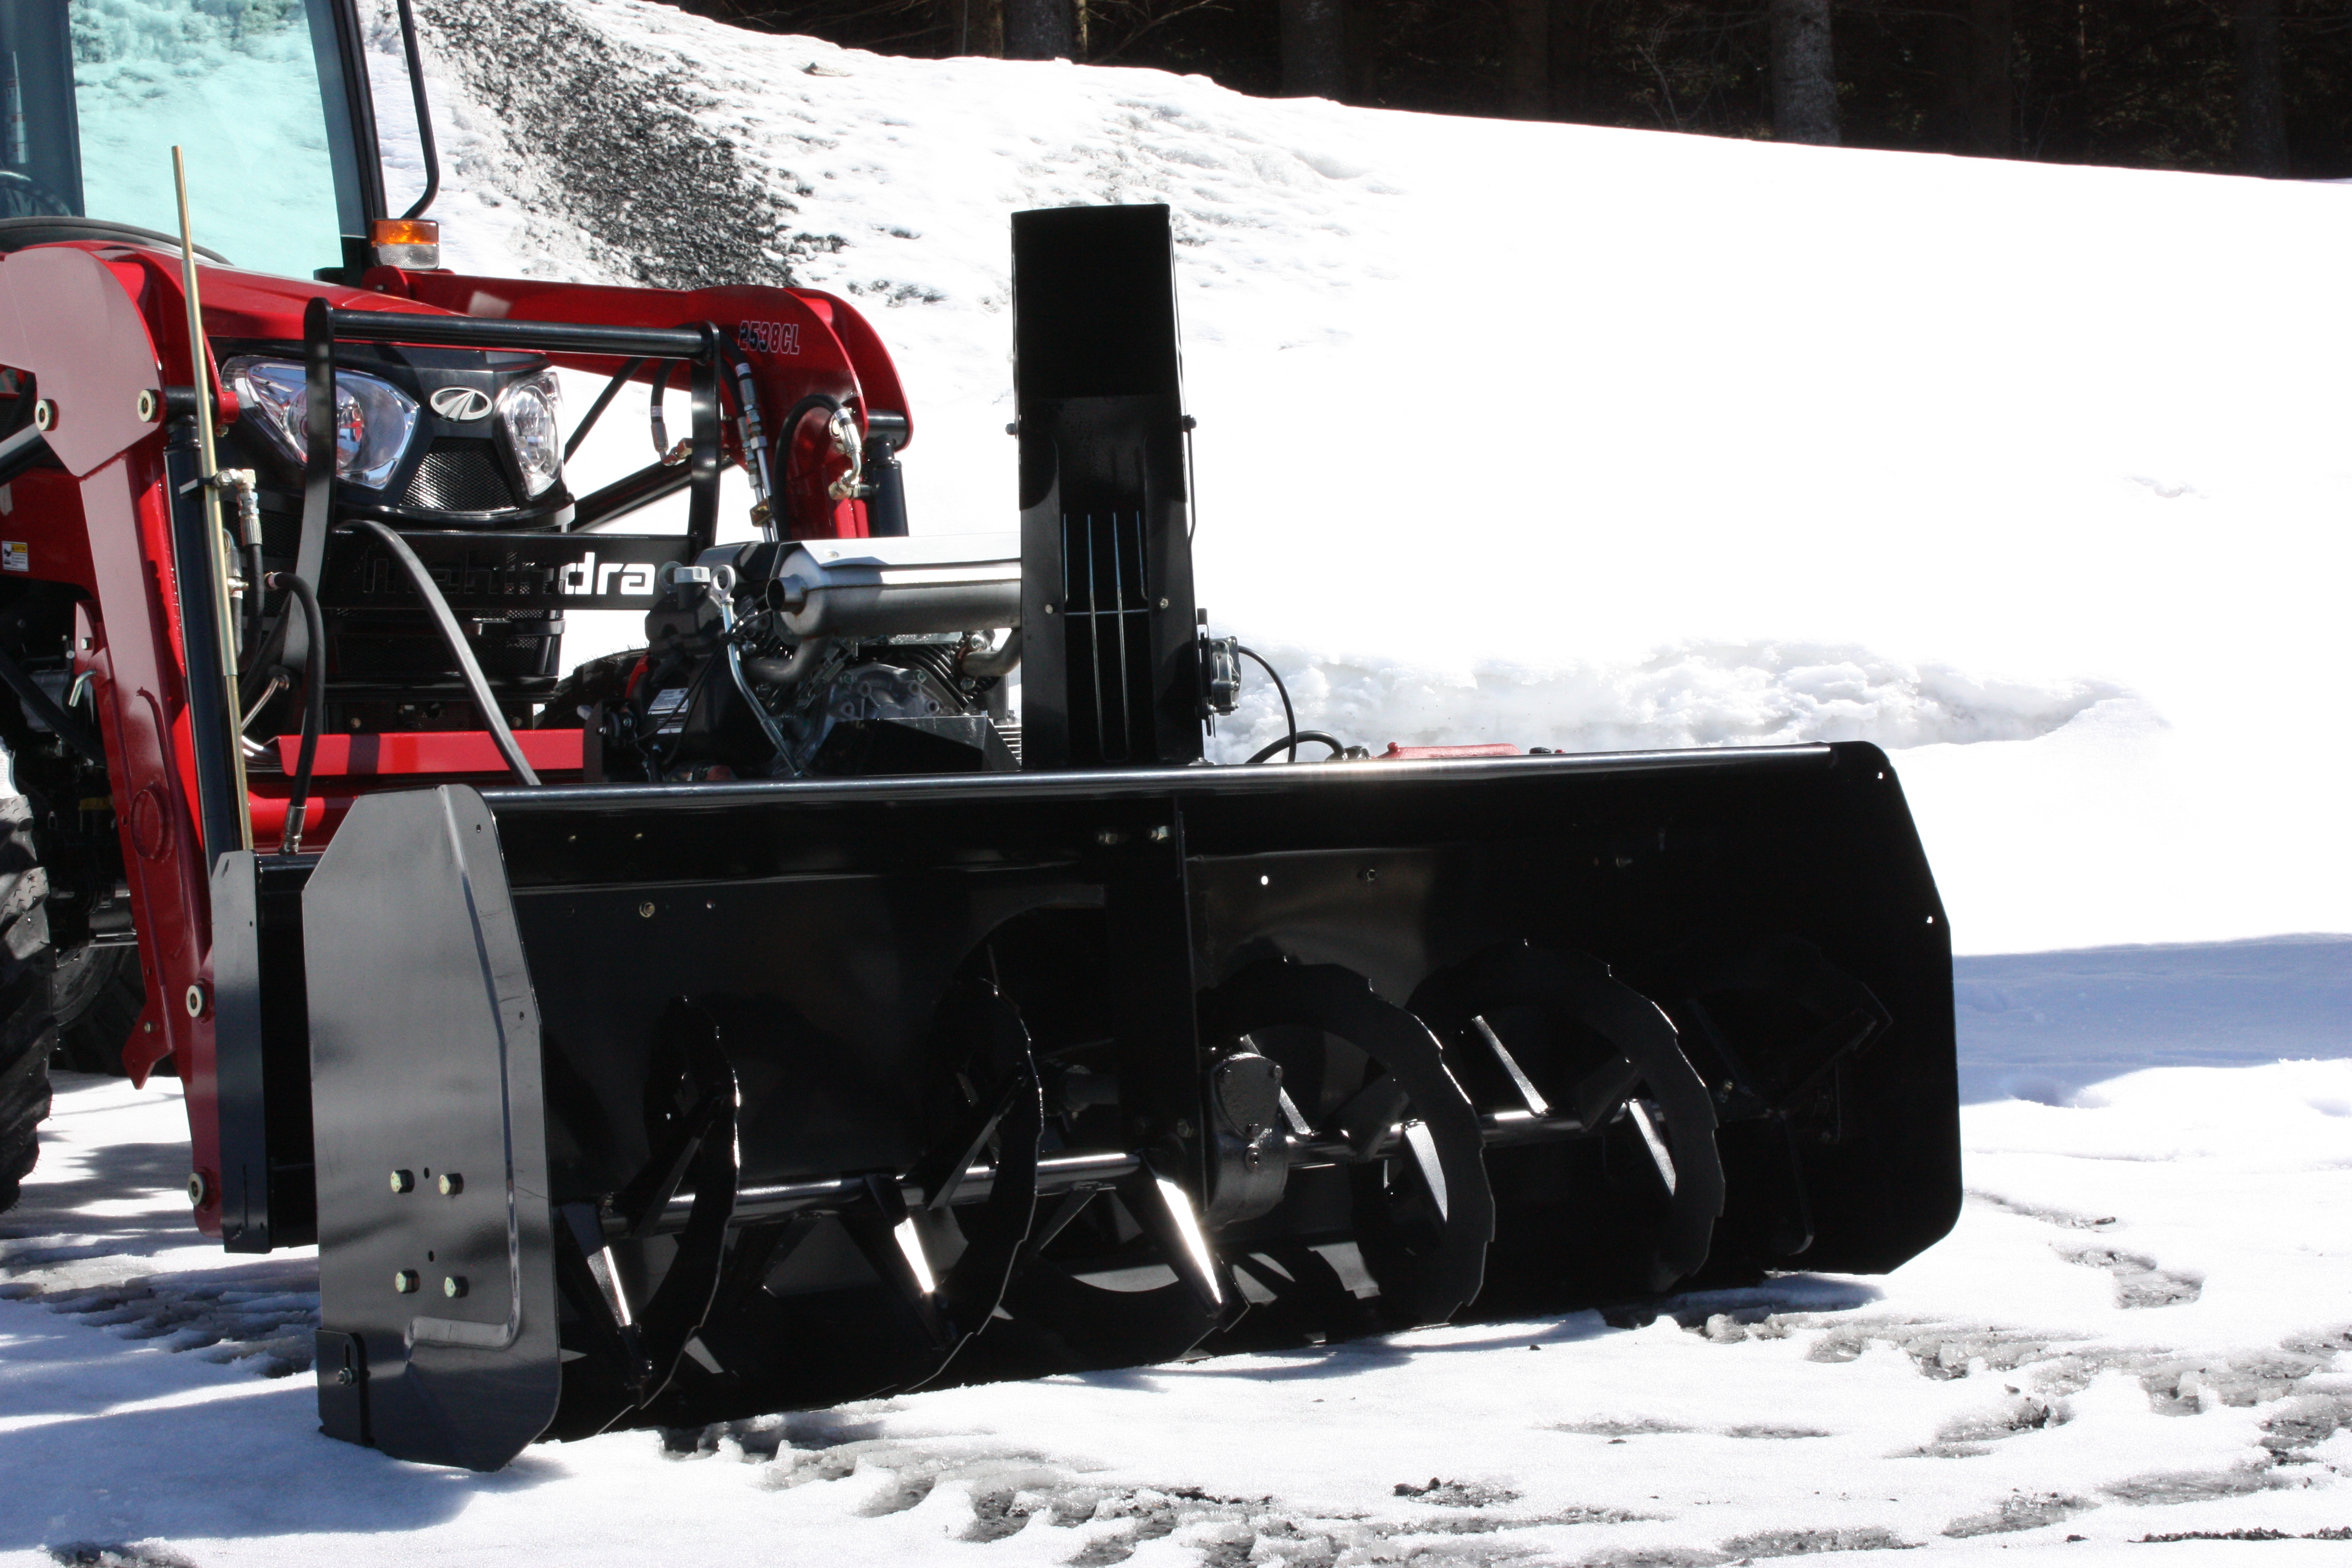 66″ Vantage Snowblower for tractors equipped with "Skid Steer" style attach